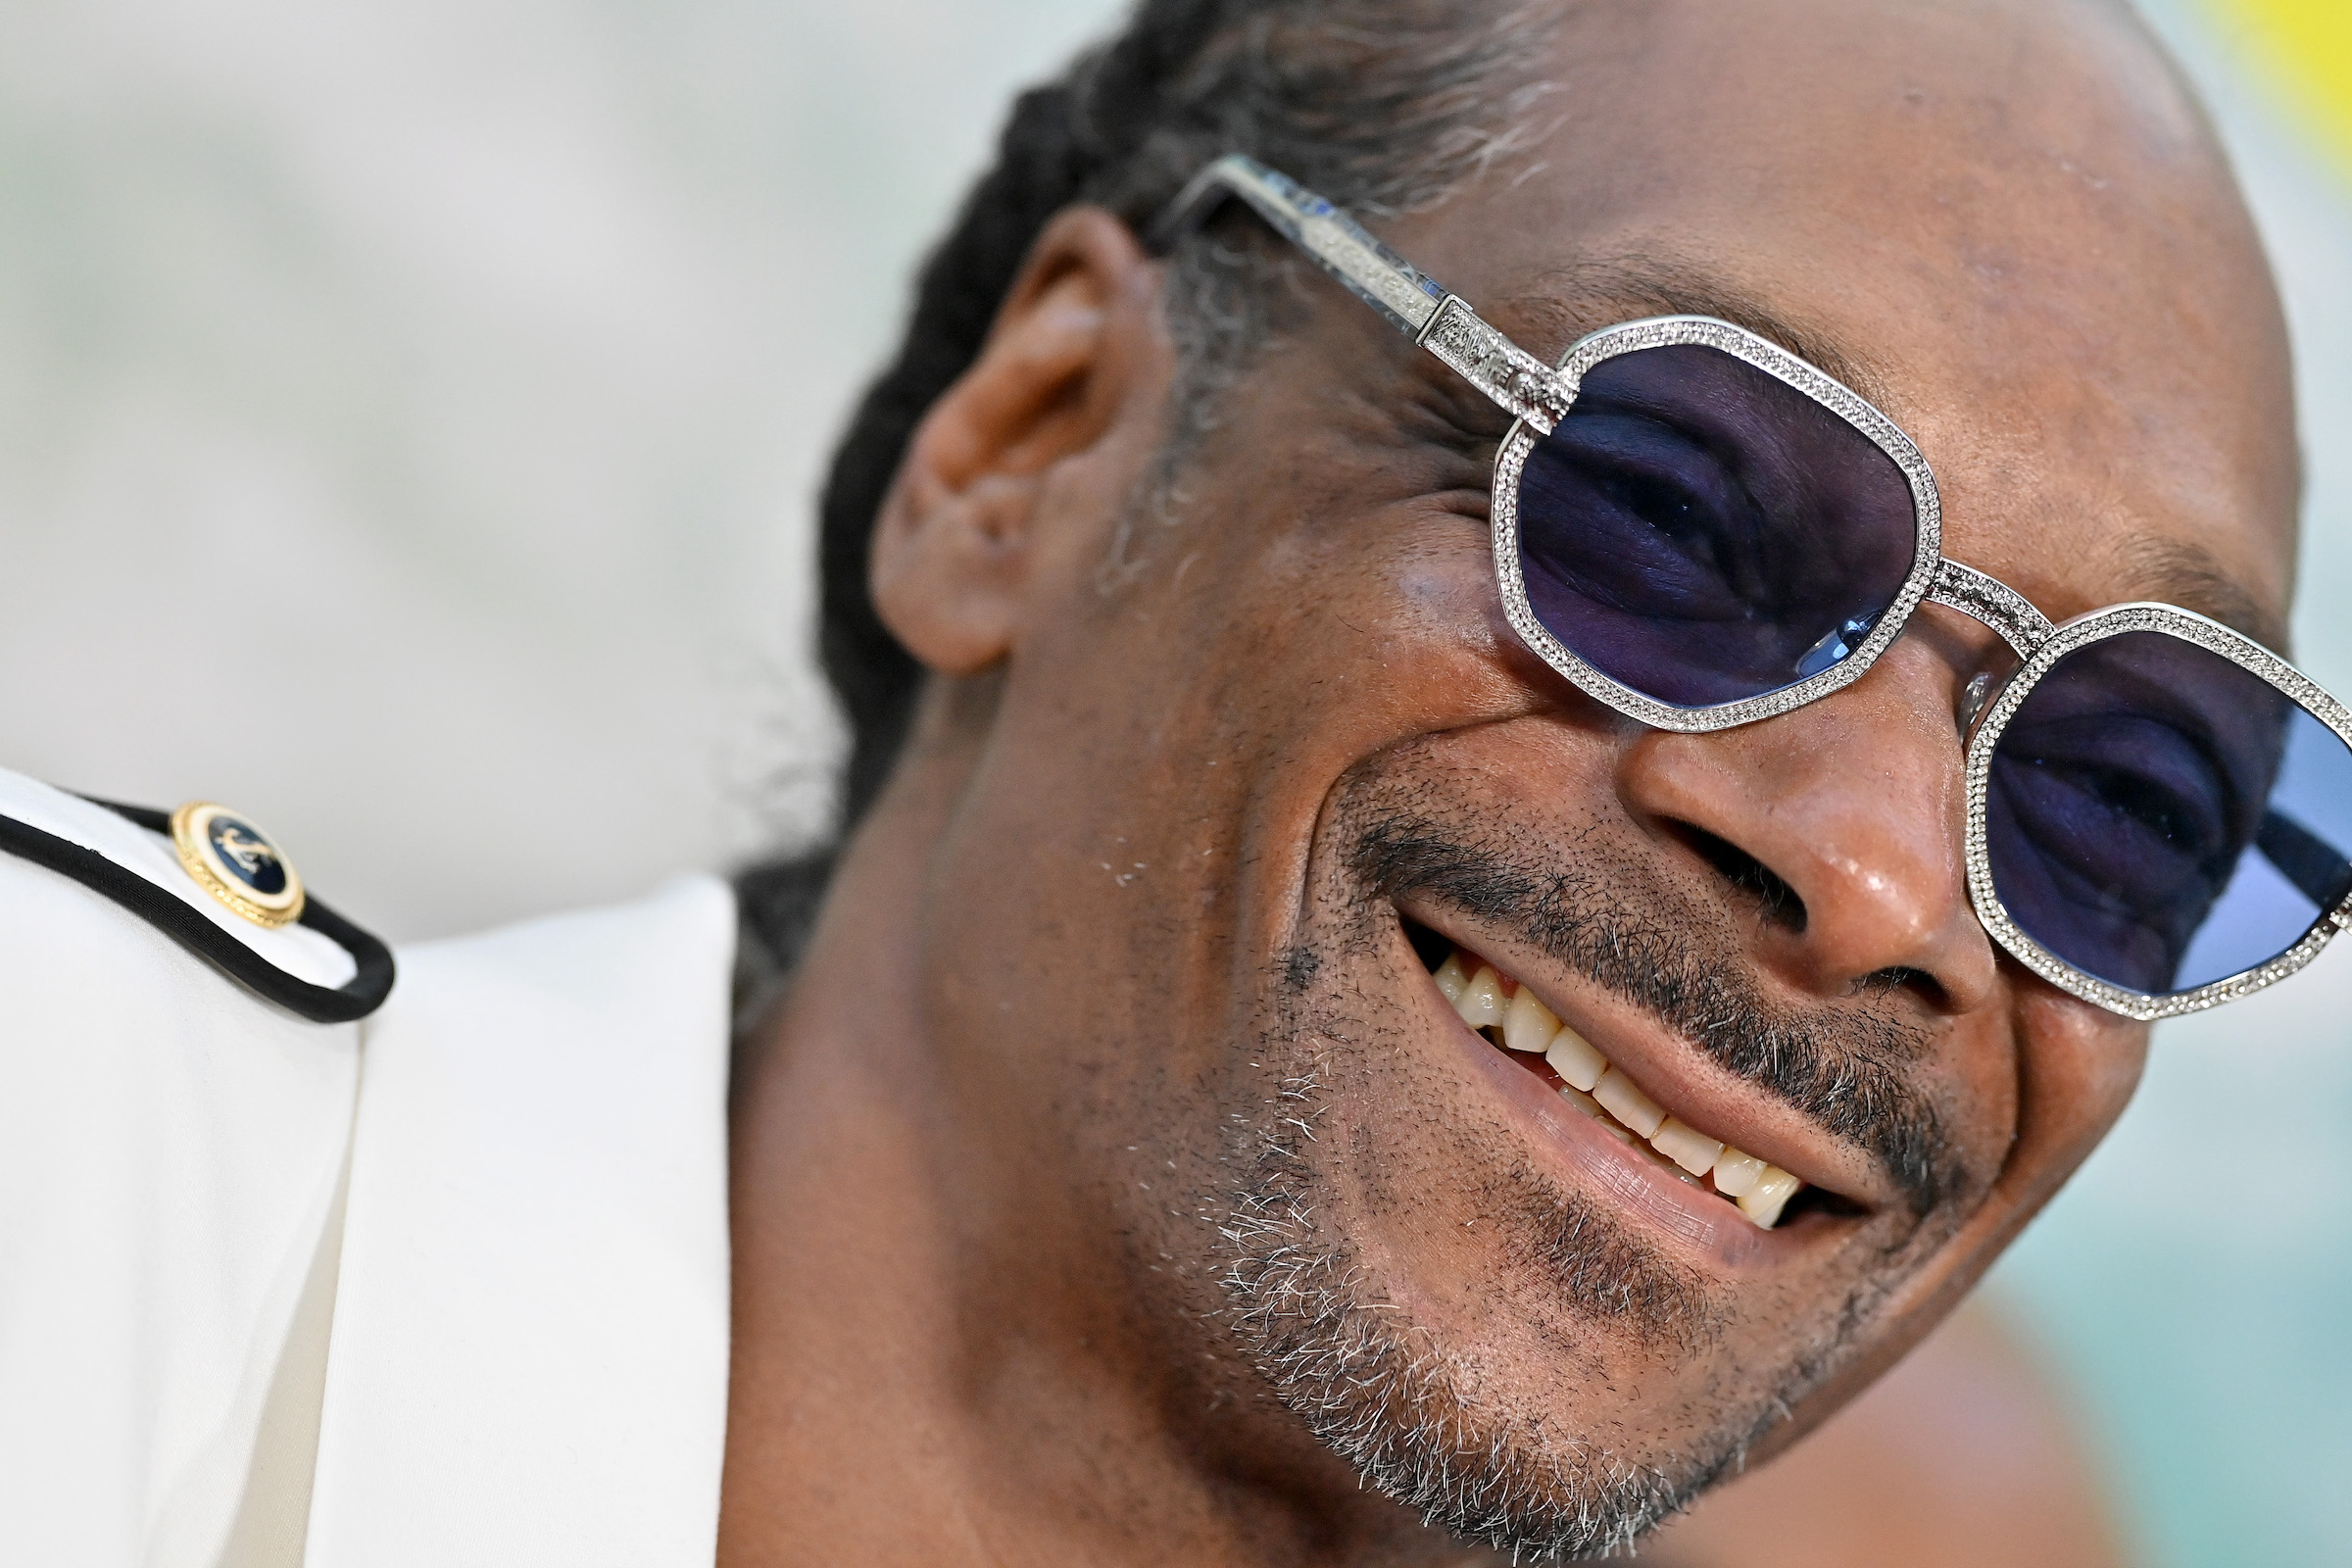 Snoop Dogg, who created his own cereal